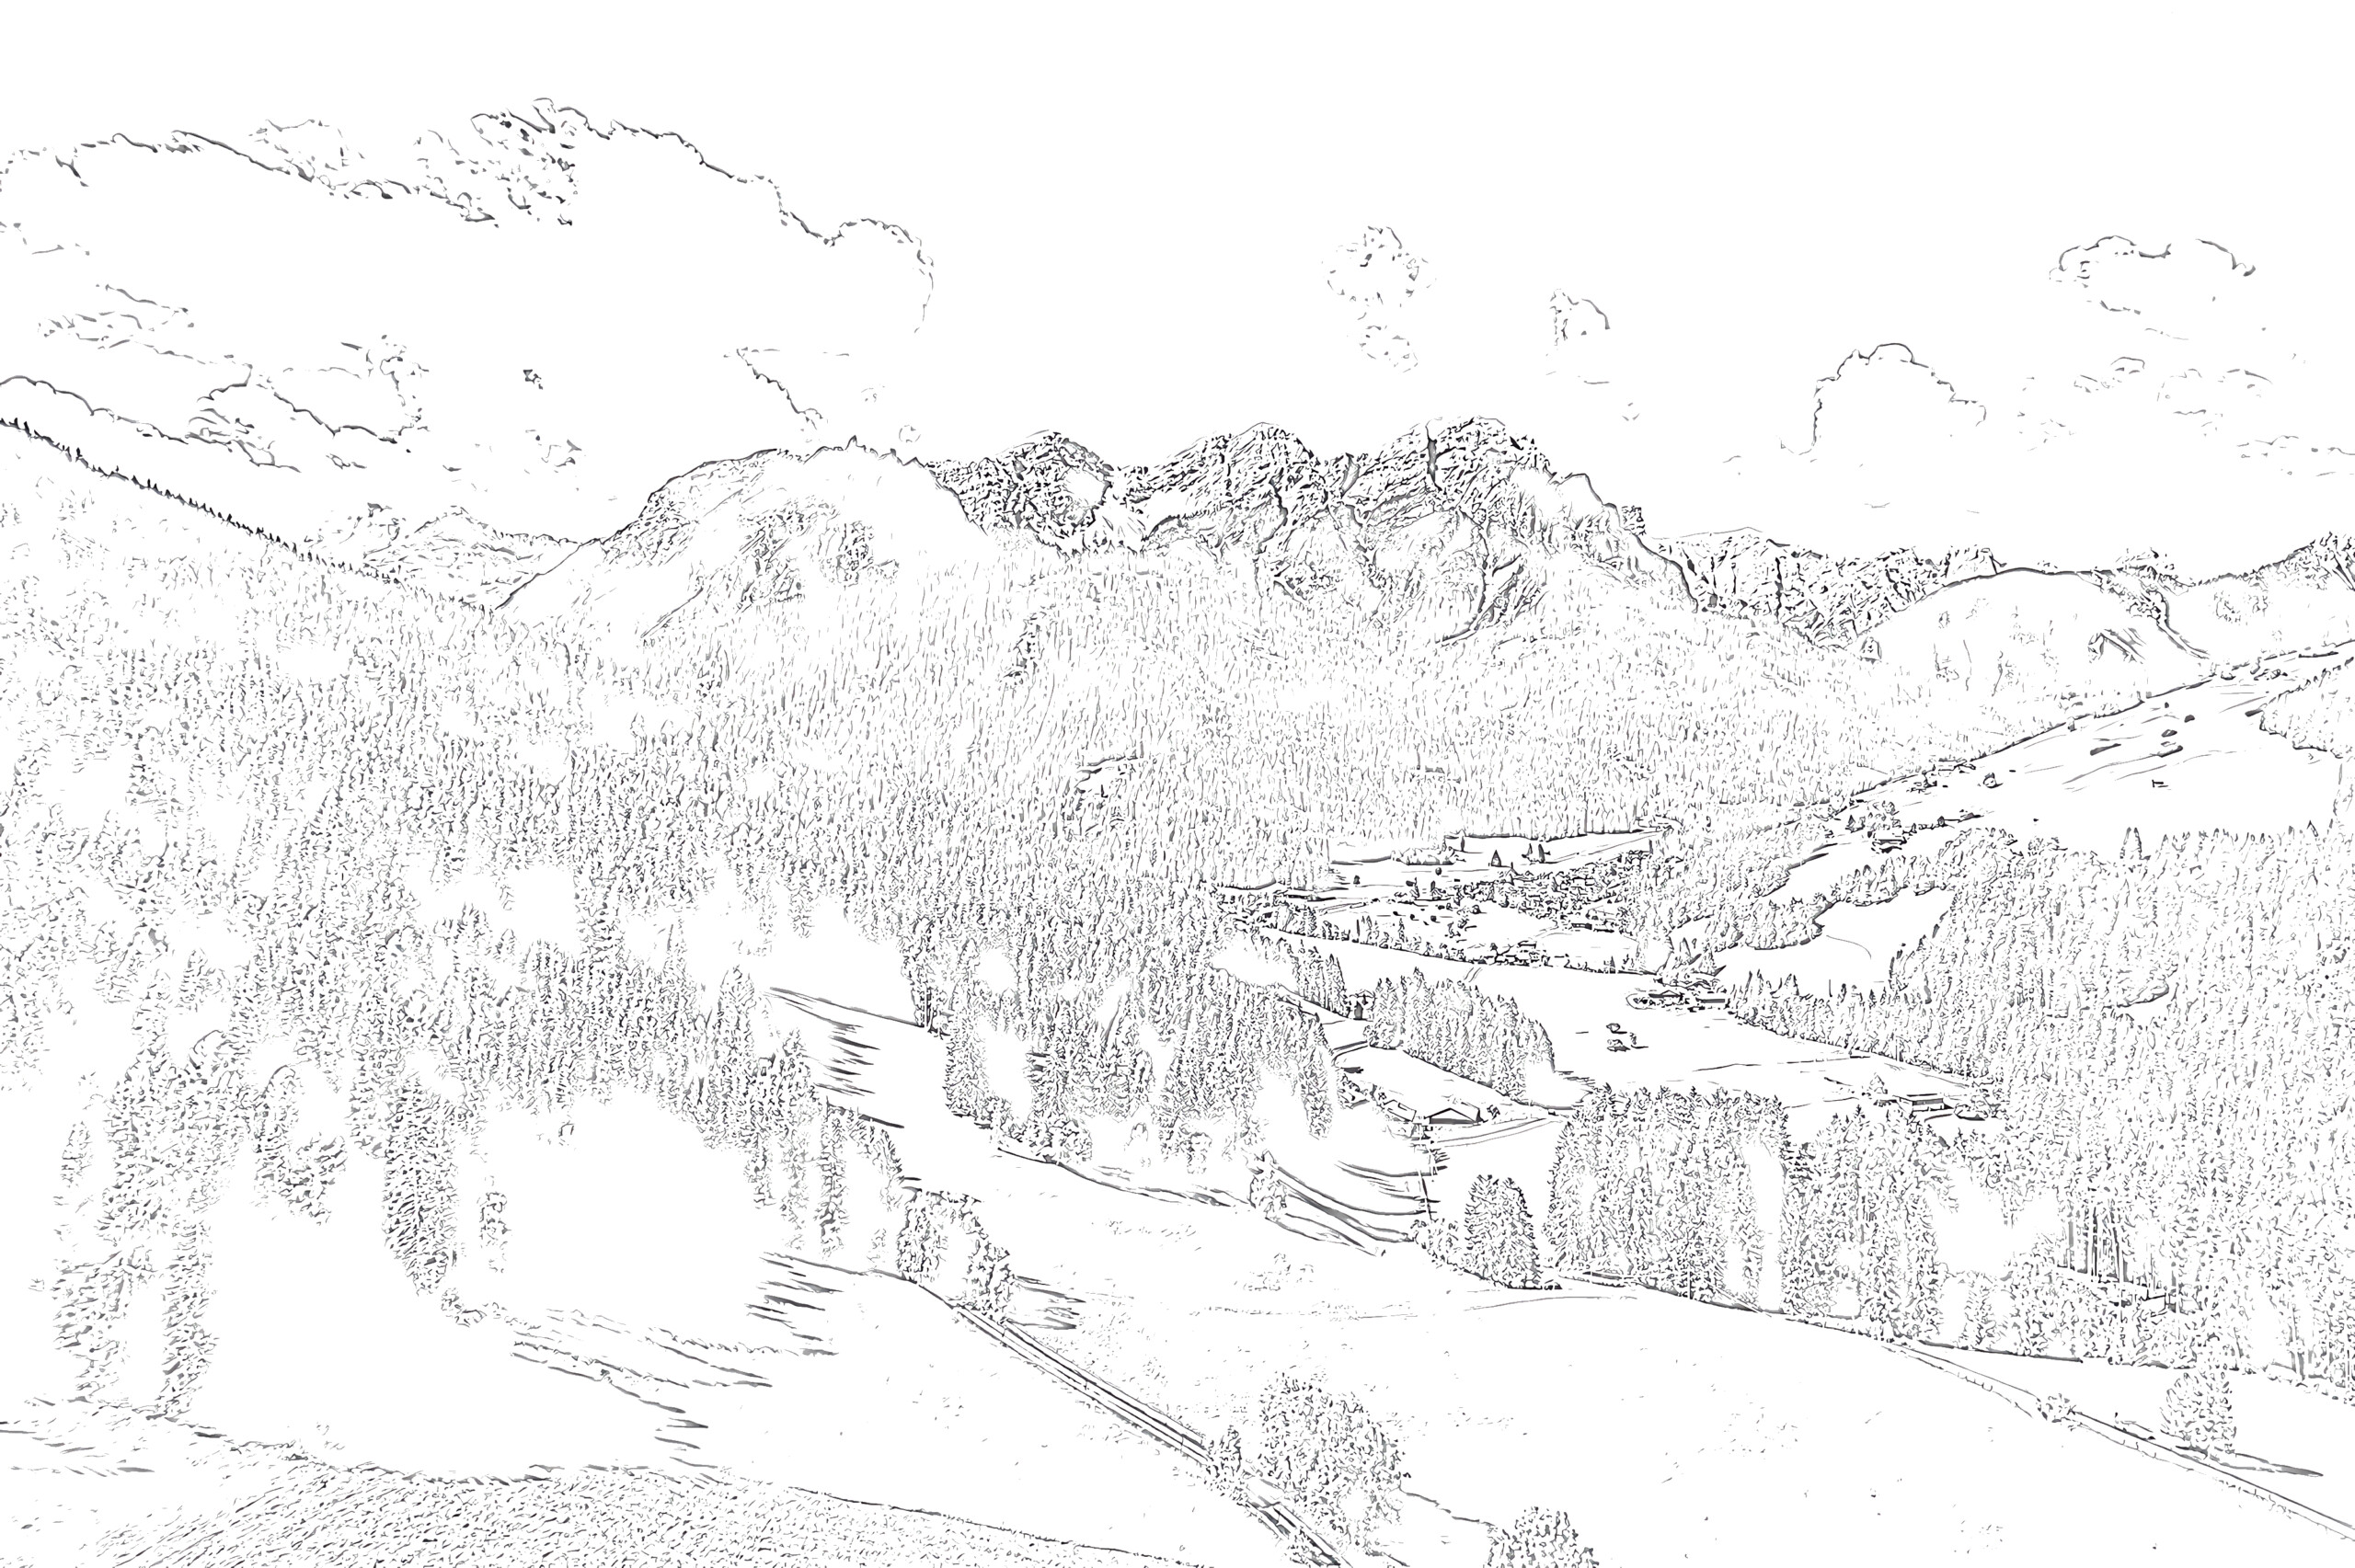 View Of The Beautiful Landscape In The Alps - Coloring page